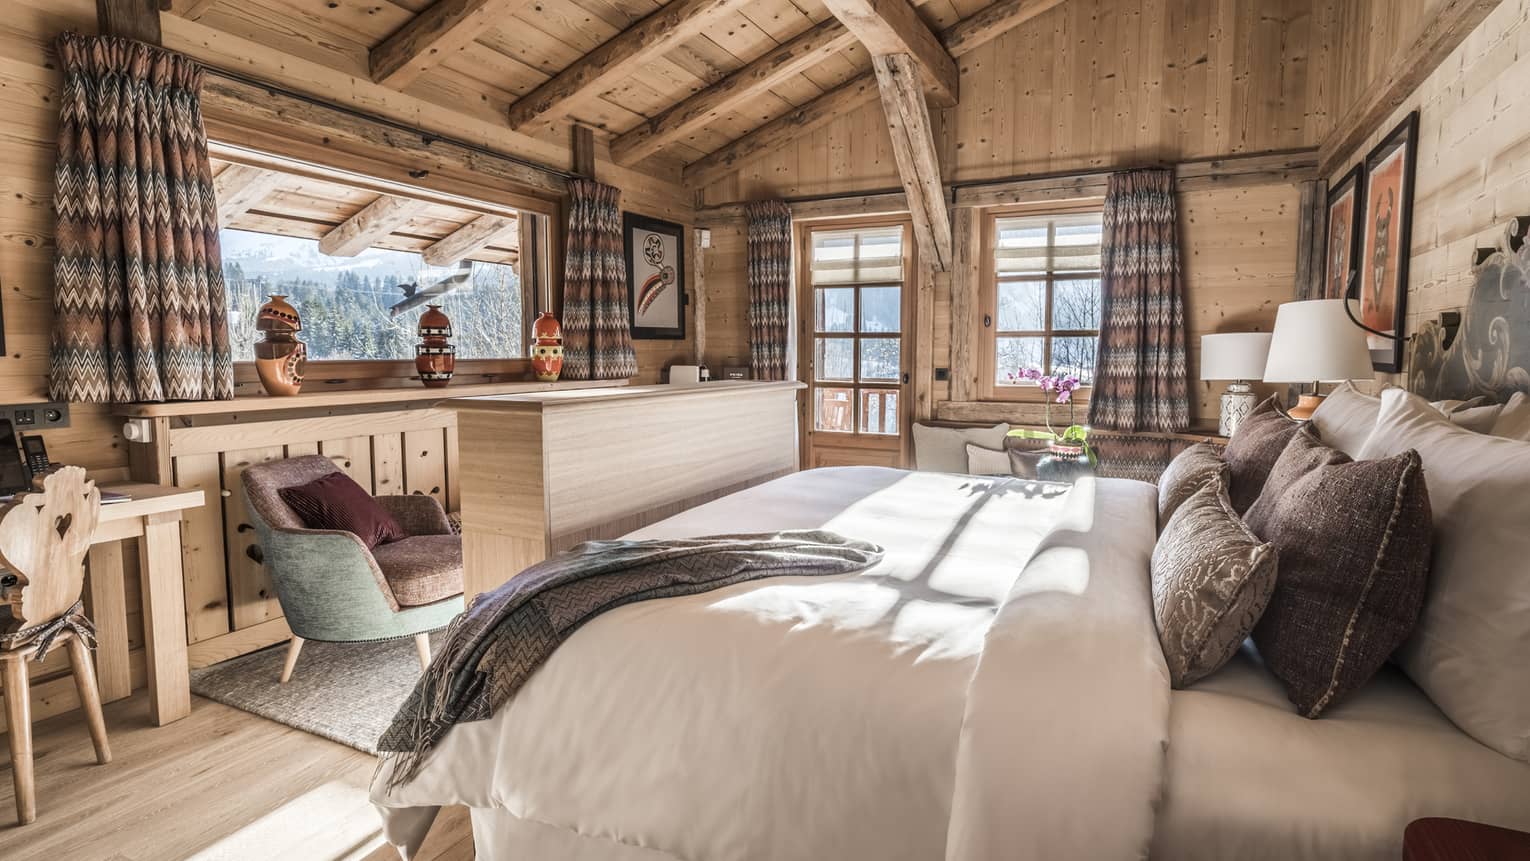 Sunny Suite Alpage room with wood, wool and tweed decor, bed, chairs near bright windows 